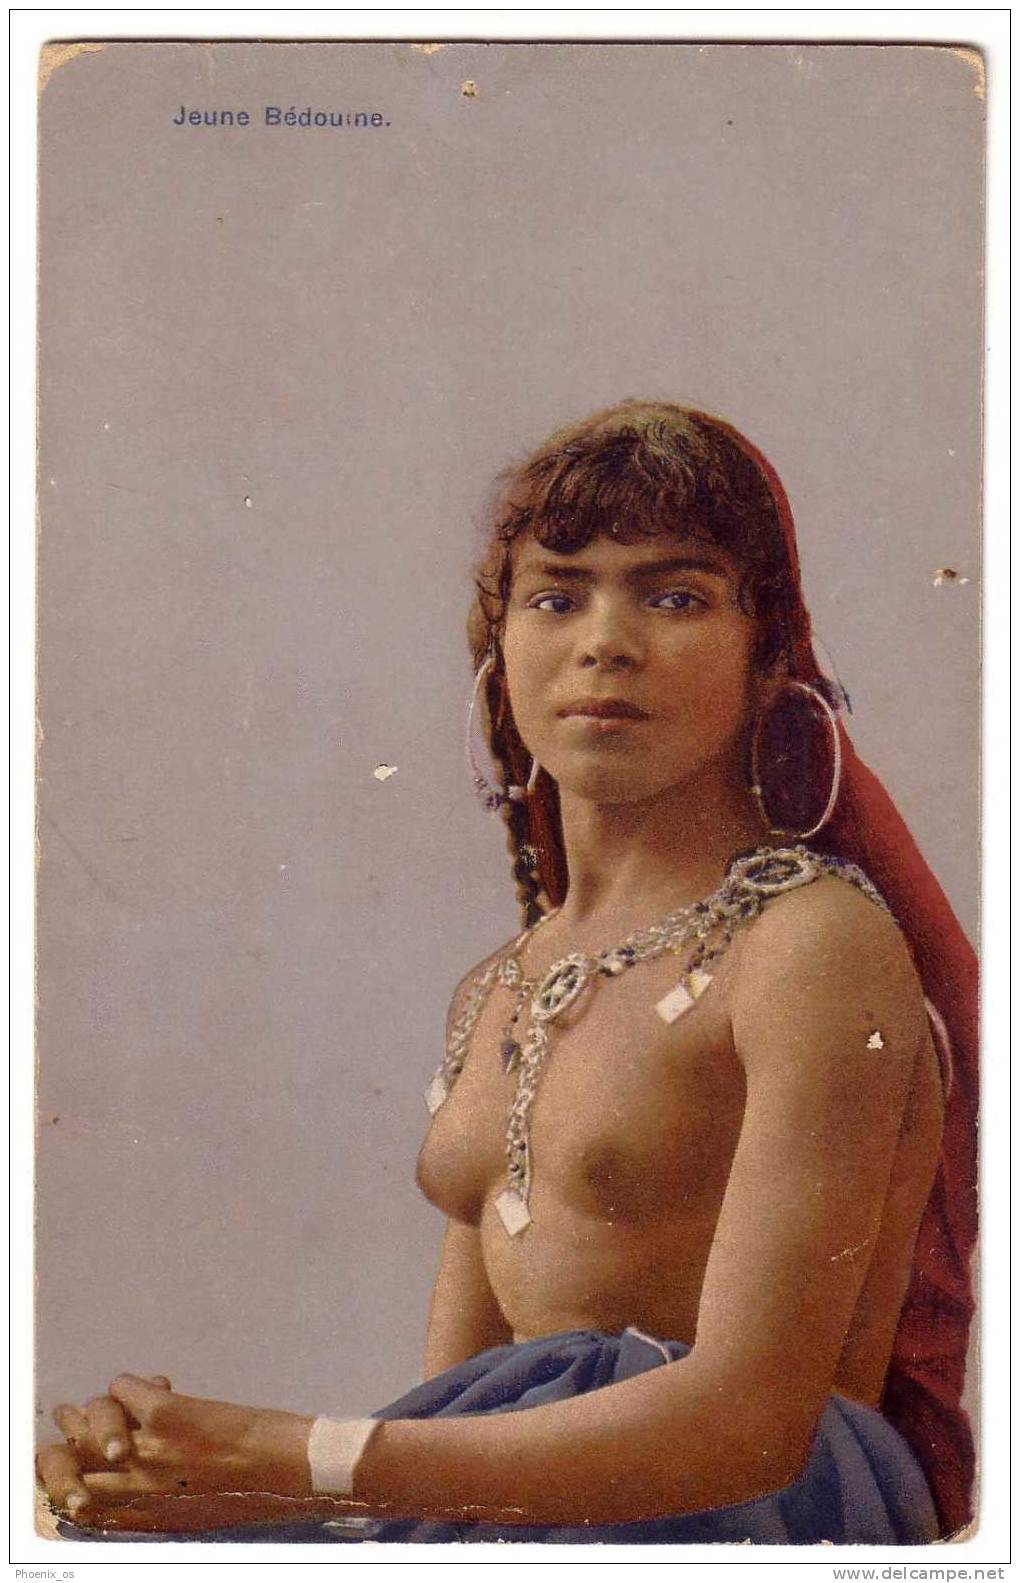 BEDOUIN - Young Girl, Old Postcard - Unclassified